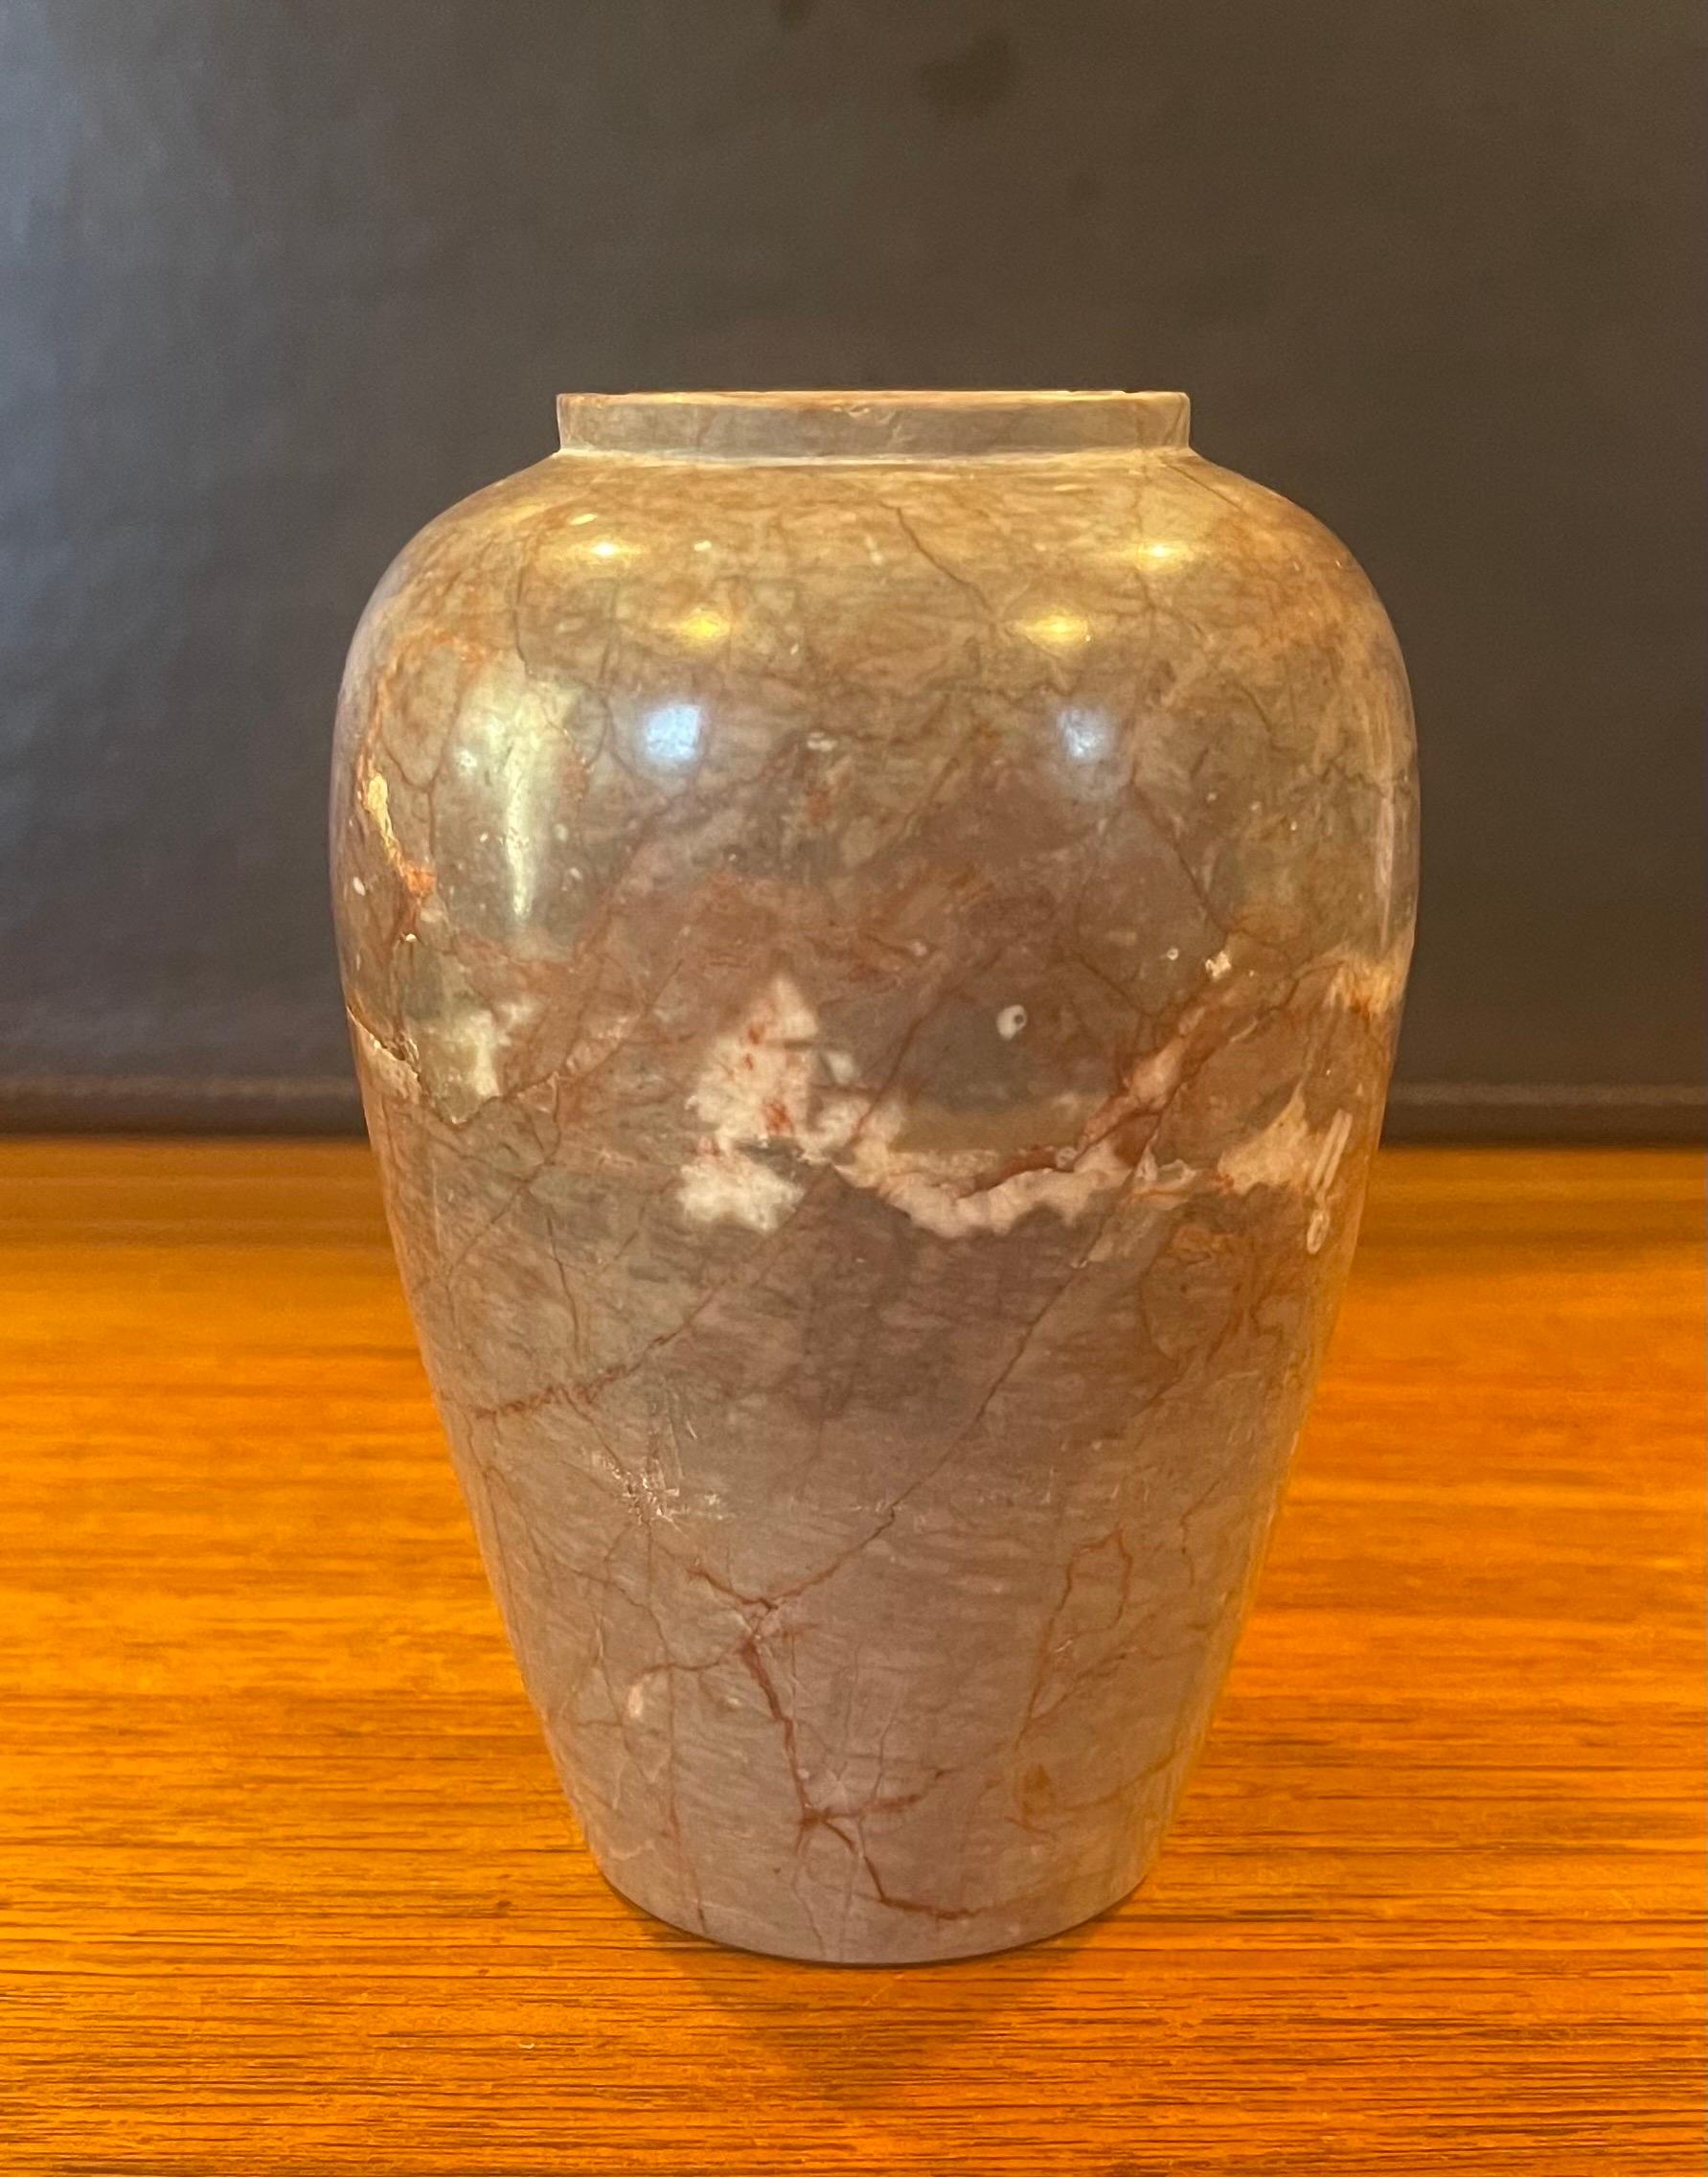 Small post-modern Italian marble vase, circa 1970s. The vase is primarily a dark tan in color, but has cream, black and red veining throughout. The vase is in very good vintage condition with one minor chip on the top ring and measures 3.5